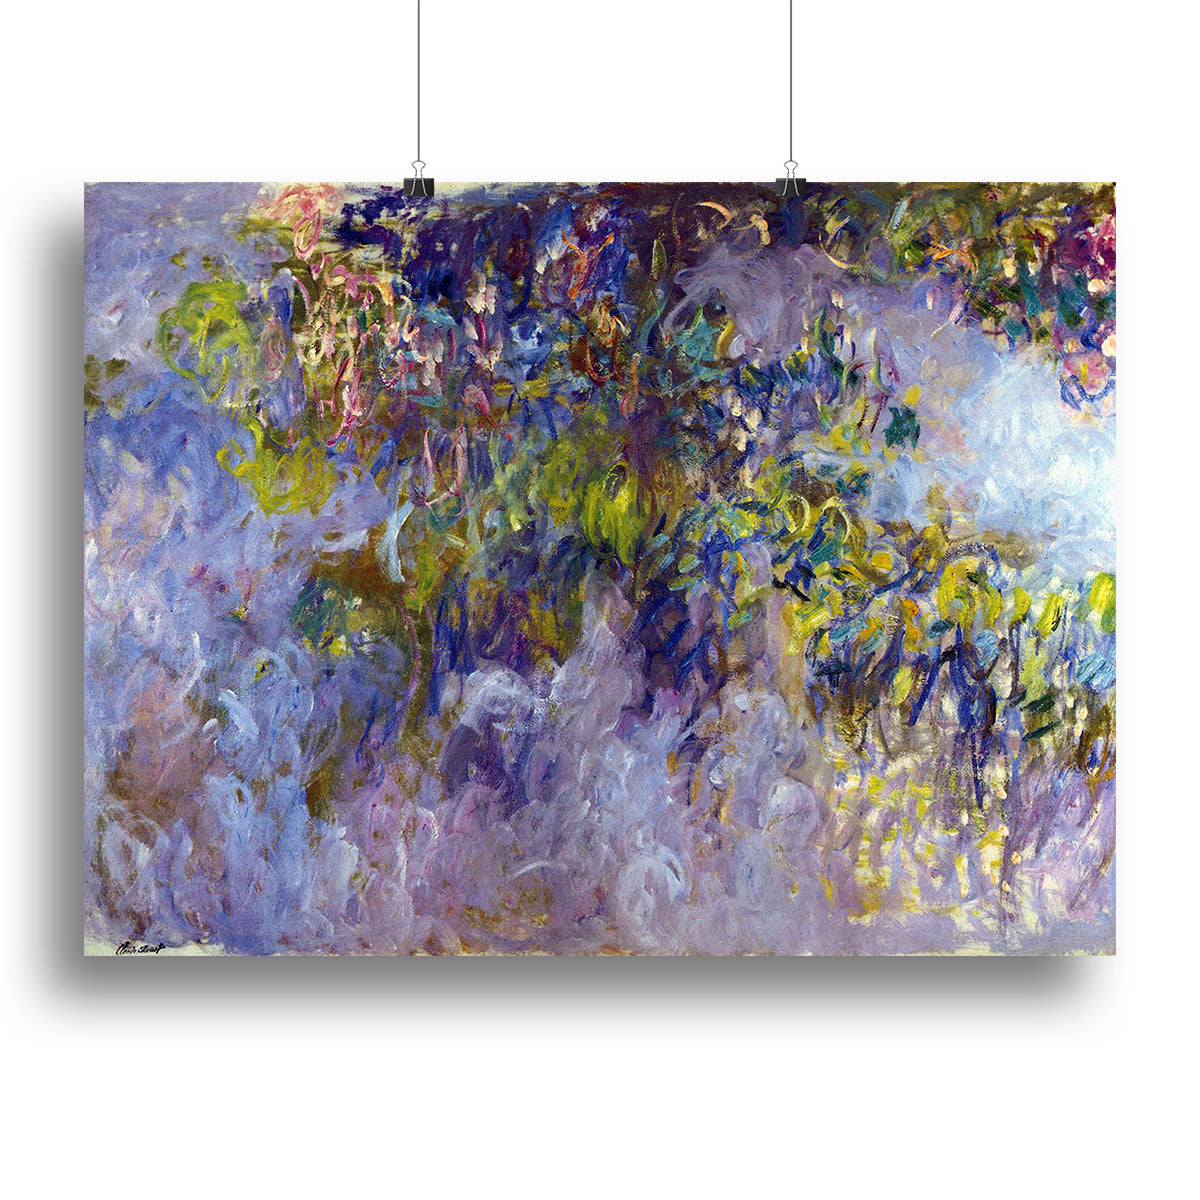 Wisteria 1 by Monet Canvas Print or Poster - Canvas Art Rocks - 2